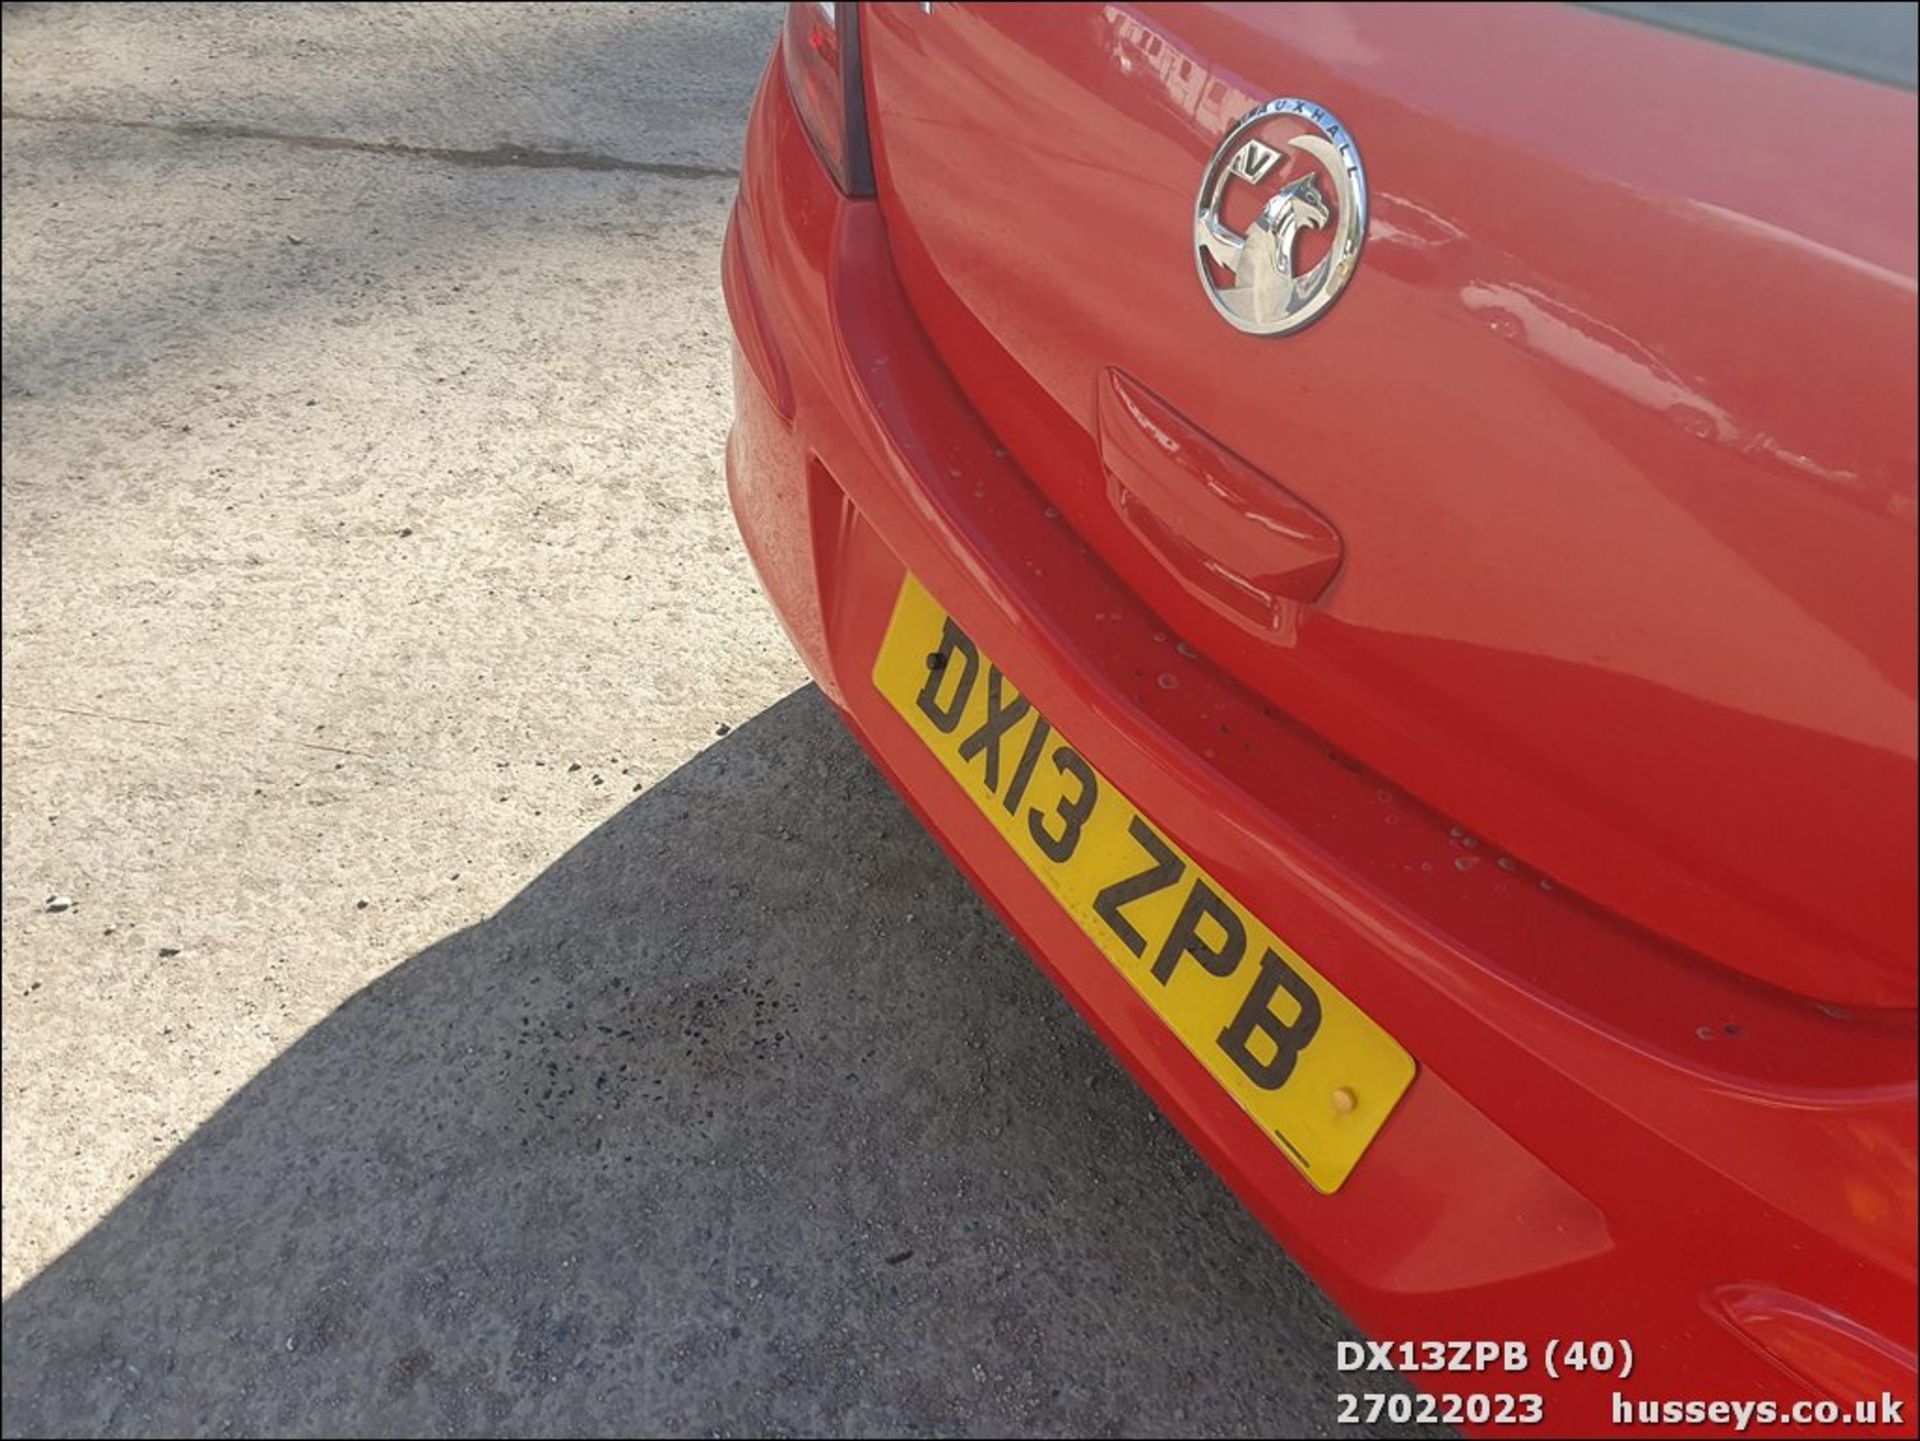 13/13 VAUXHALL CORSA EXCLUSIV AC - 1229cc 5dr Hatchback (Red, 82k) - Image 40 of 52